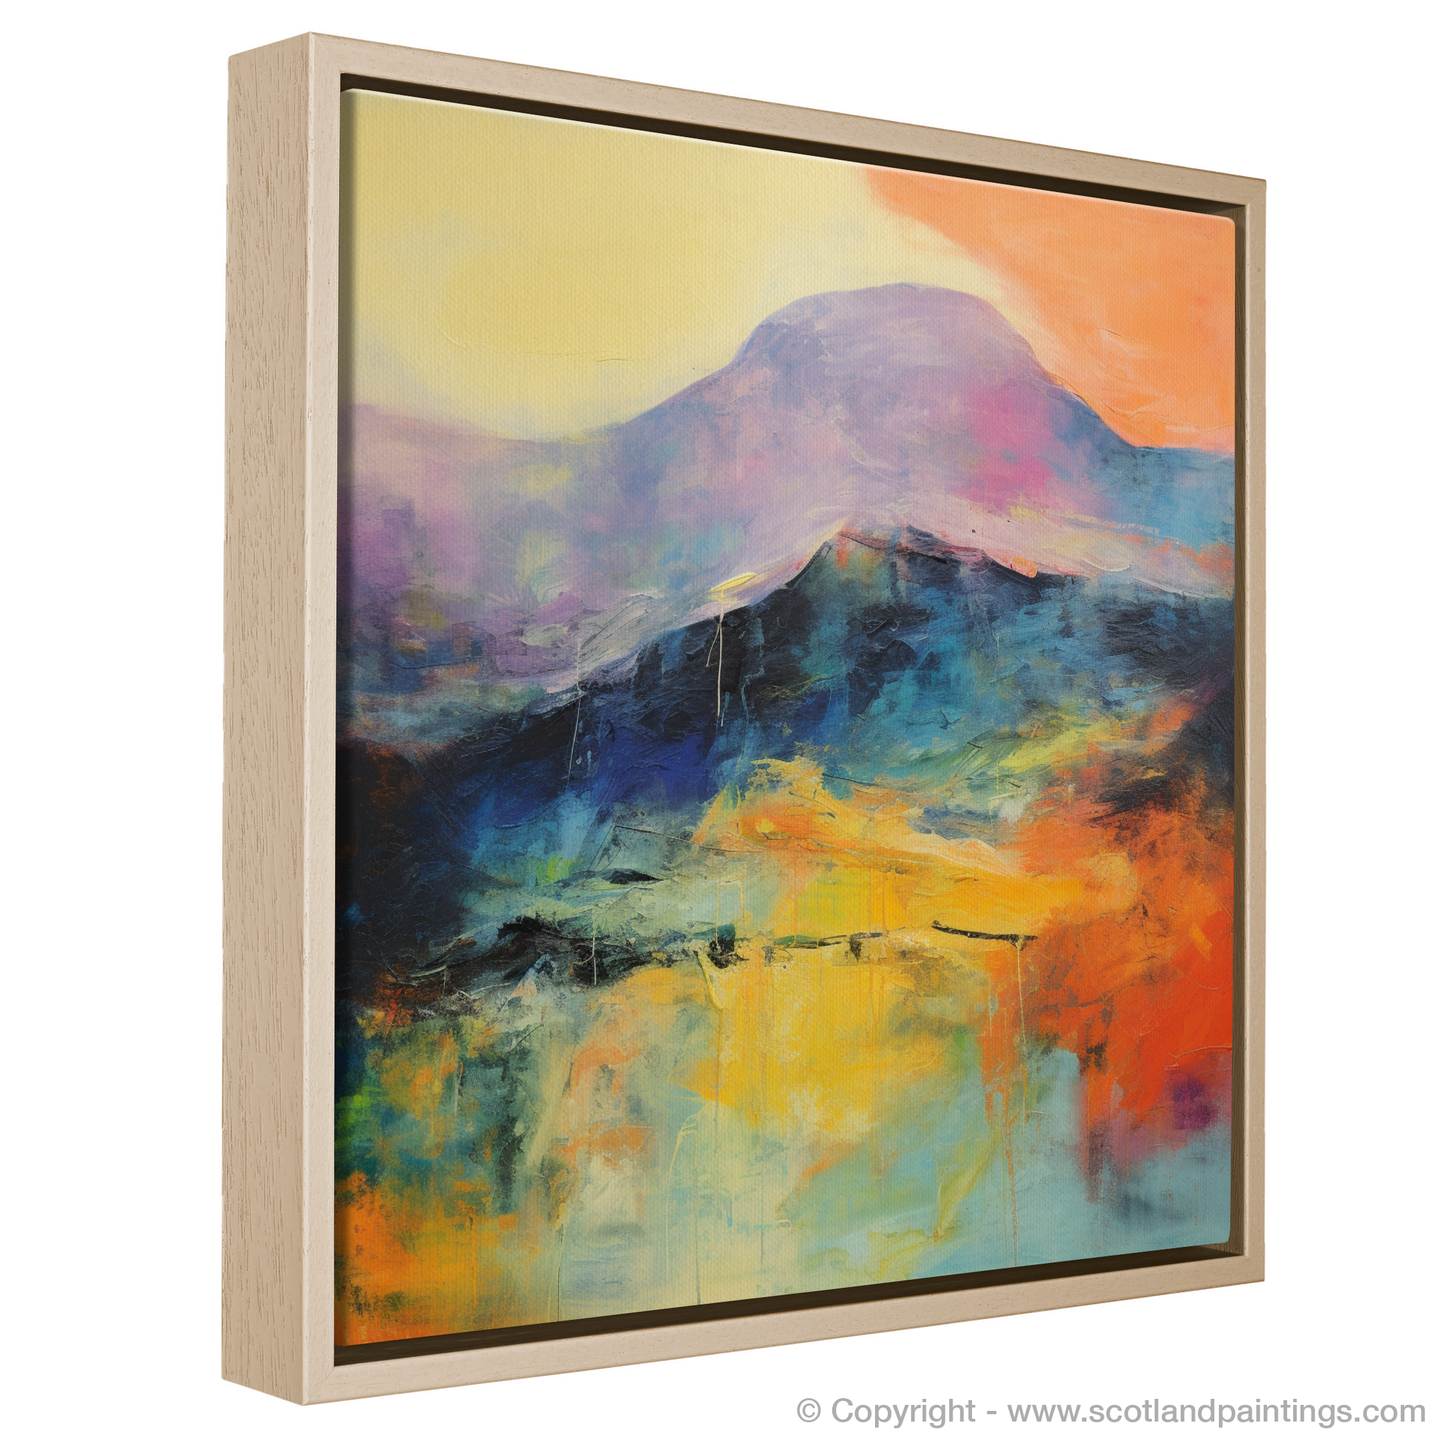 Painting and Art Print of Ben Lawers, Perth and Kinross entitled "Majestic Dance of Ben Lawers: An Abstract Expressionist Tribute".